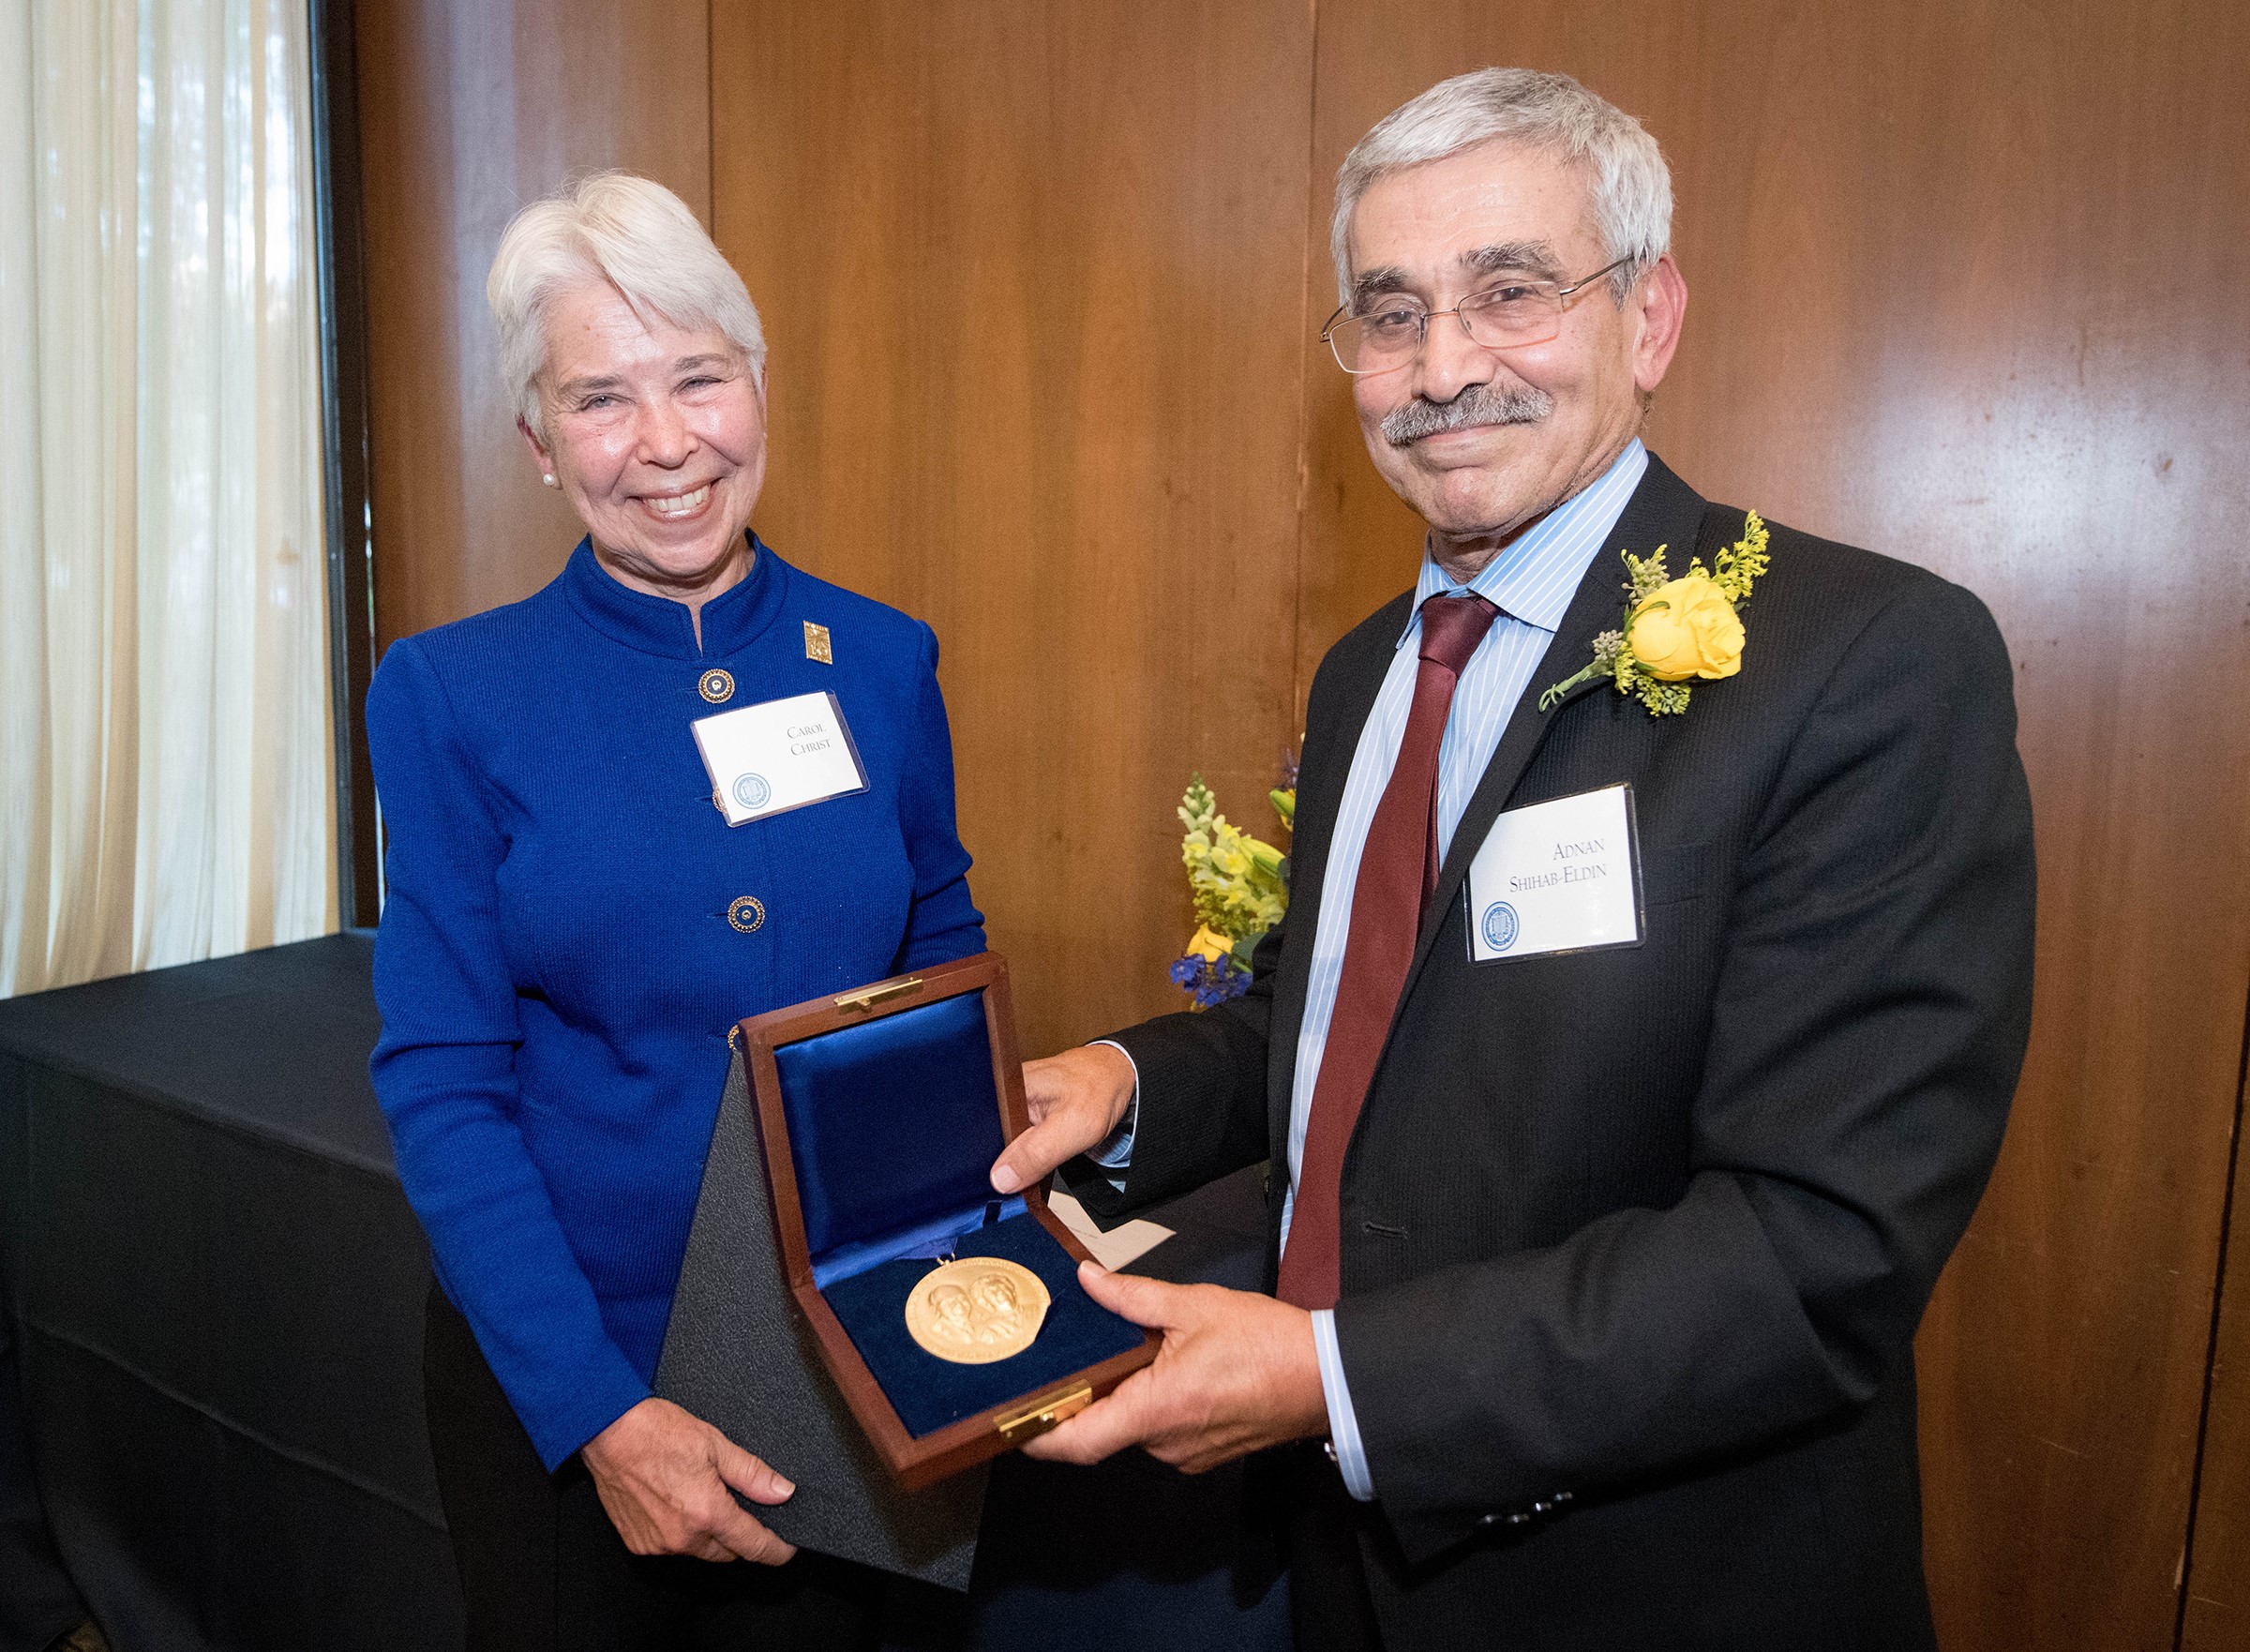 Director General of the Kuwait Foundation for the Advancement of Sciences (KFAS), Dr. Adnan Shihab-Eldin was awarded the 2017 Elise and Walter A. Haas International Award